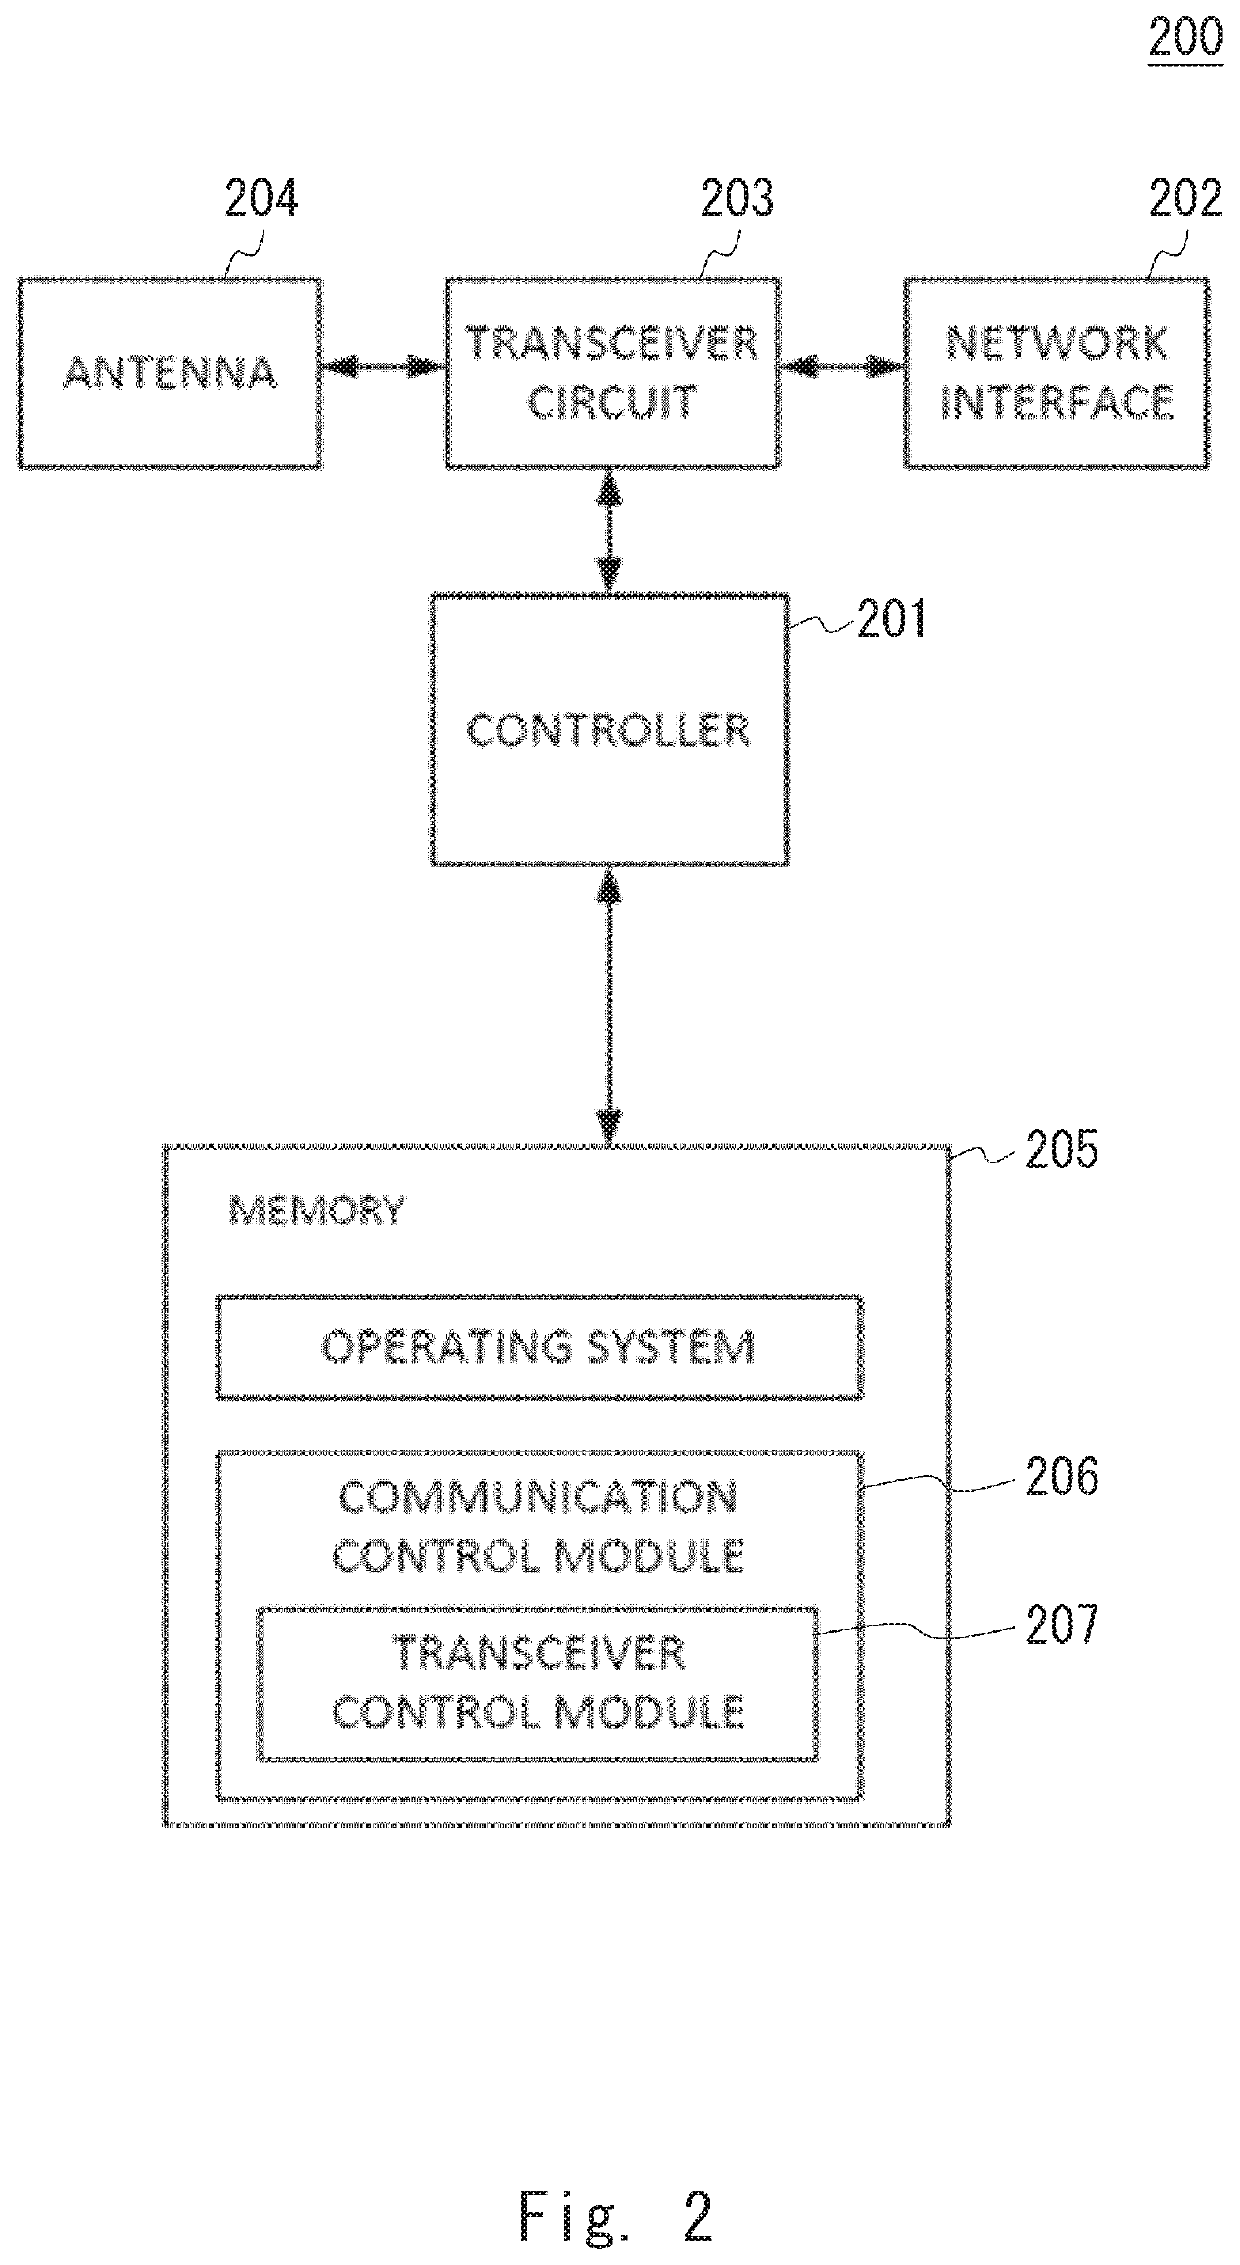 Method for synchronizing status of ue in a communication network